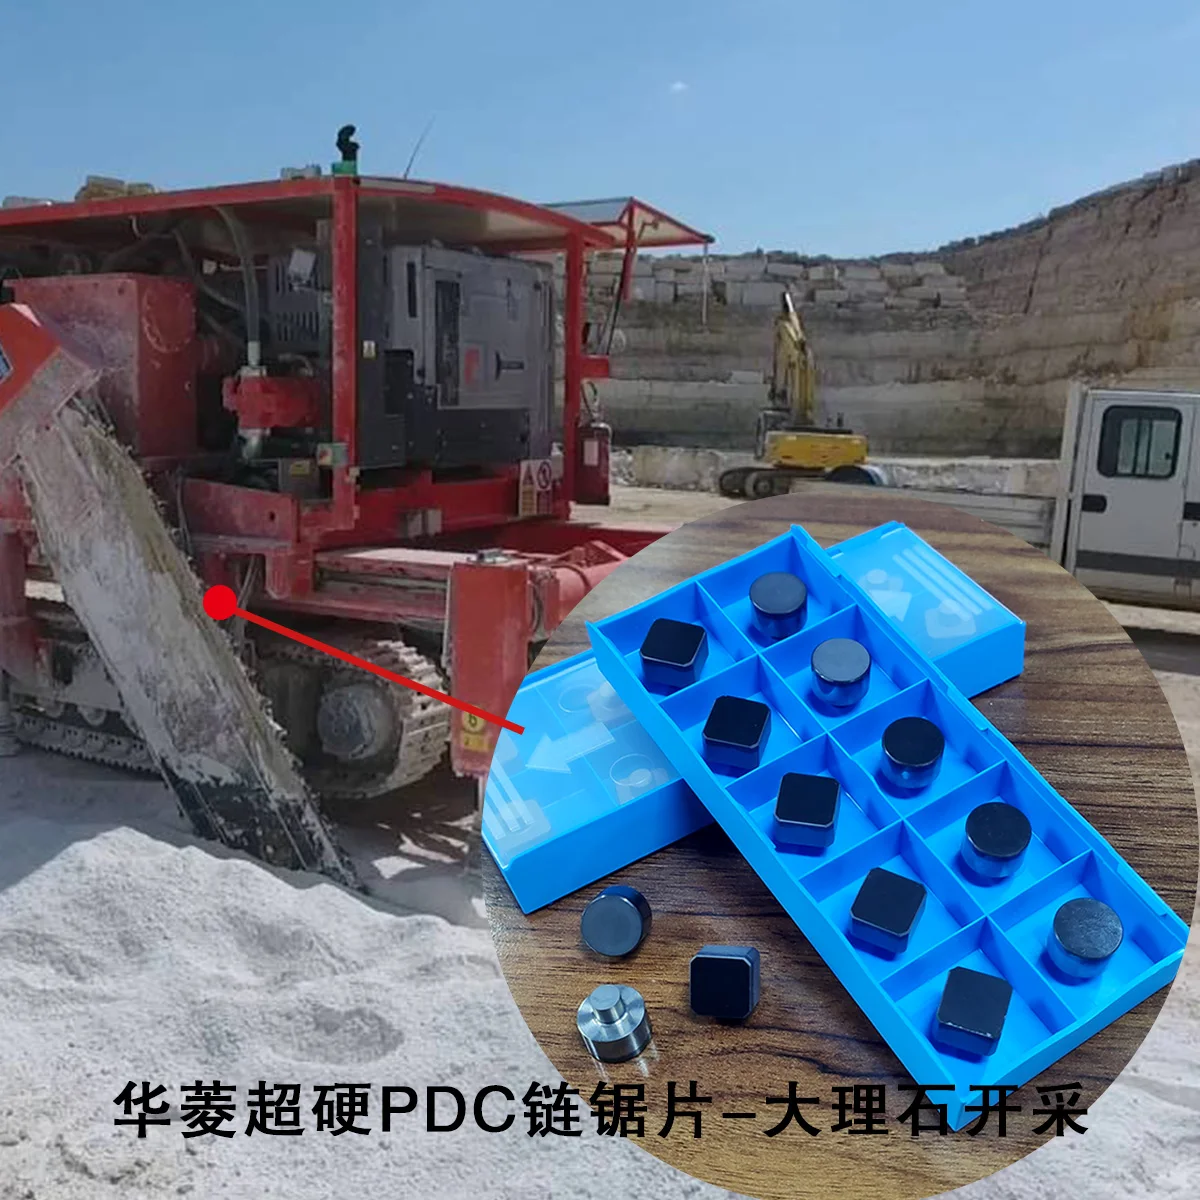 PDC cutter PDC cutters  Chainsaw machines cutting equipment MARBLE